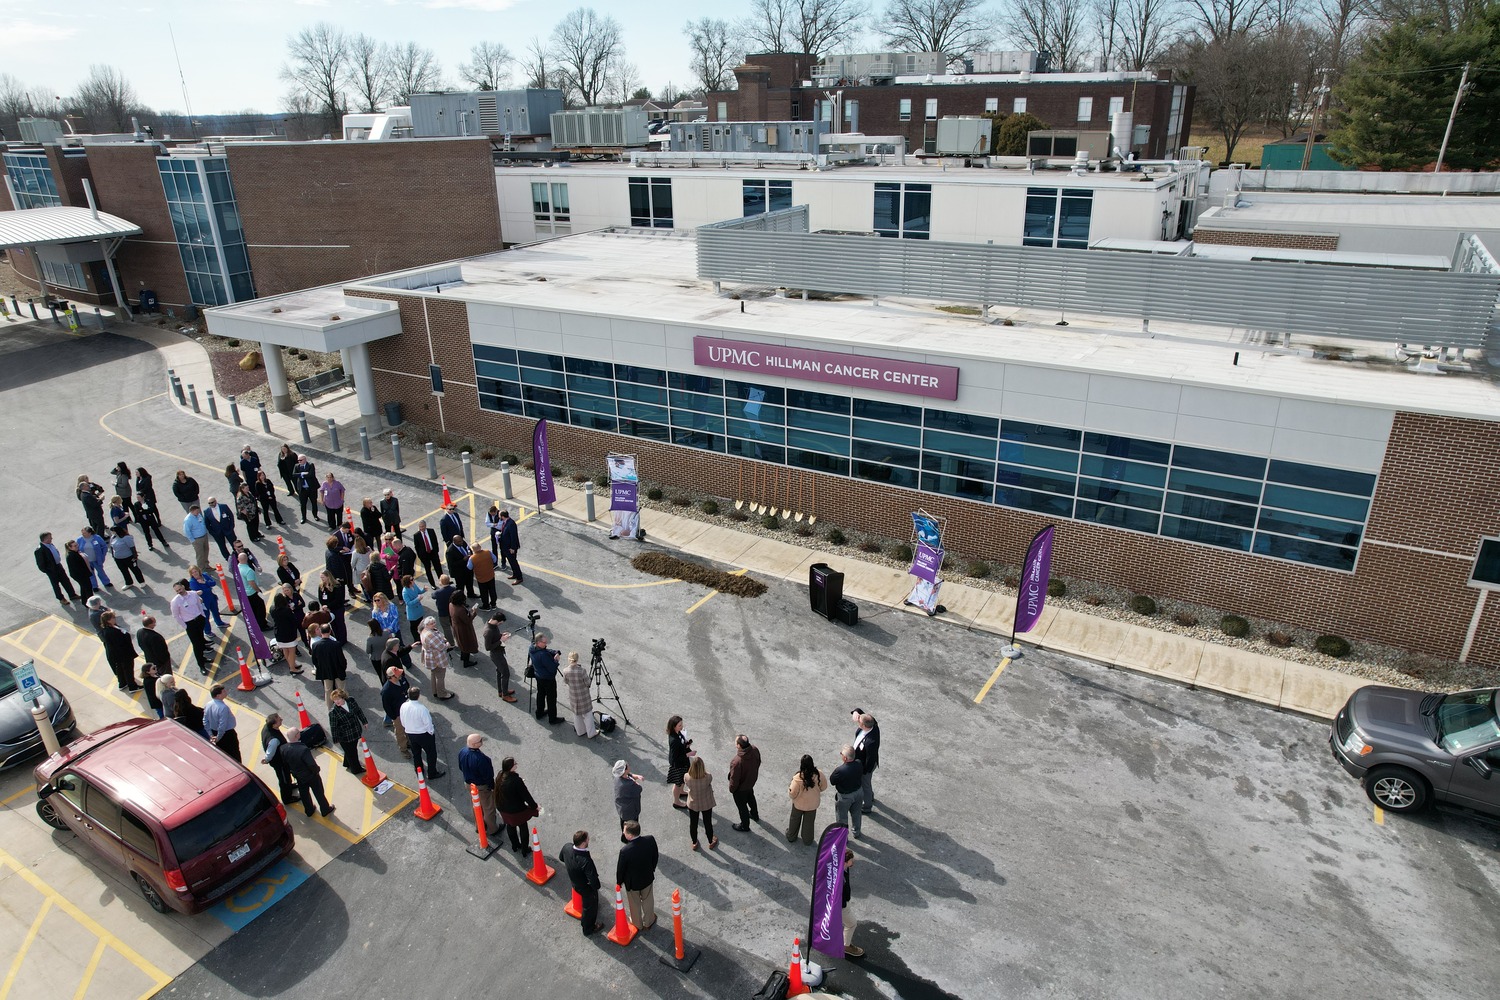 A group of people gathered for the groundbreaking of UPMC Hillman Cancer Center Radiology Oncology. The building reads "UPMC Medical Center"